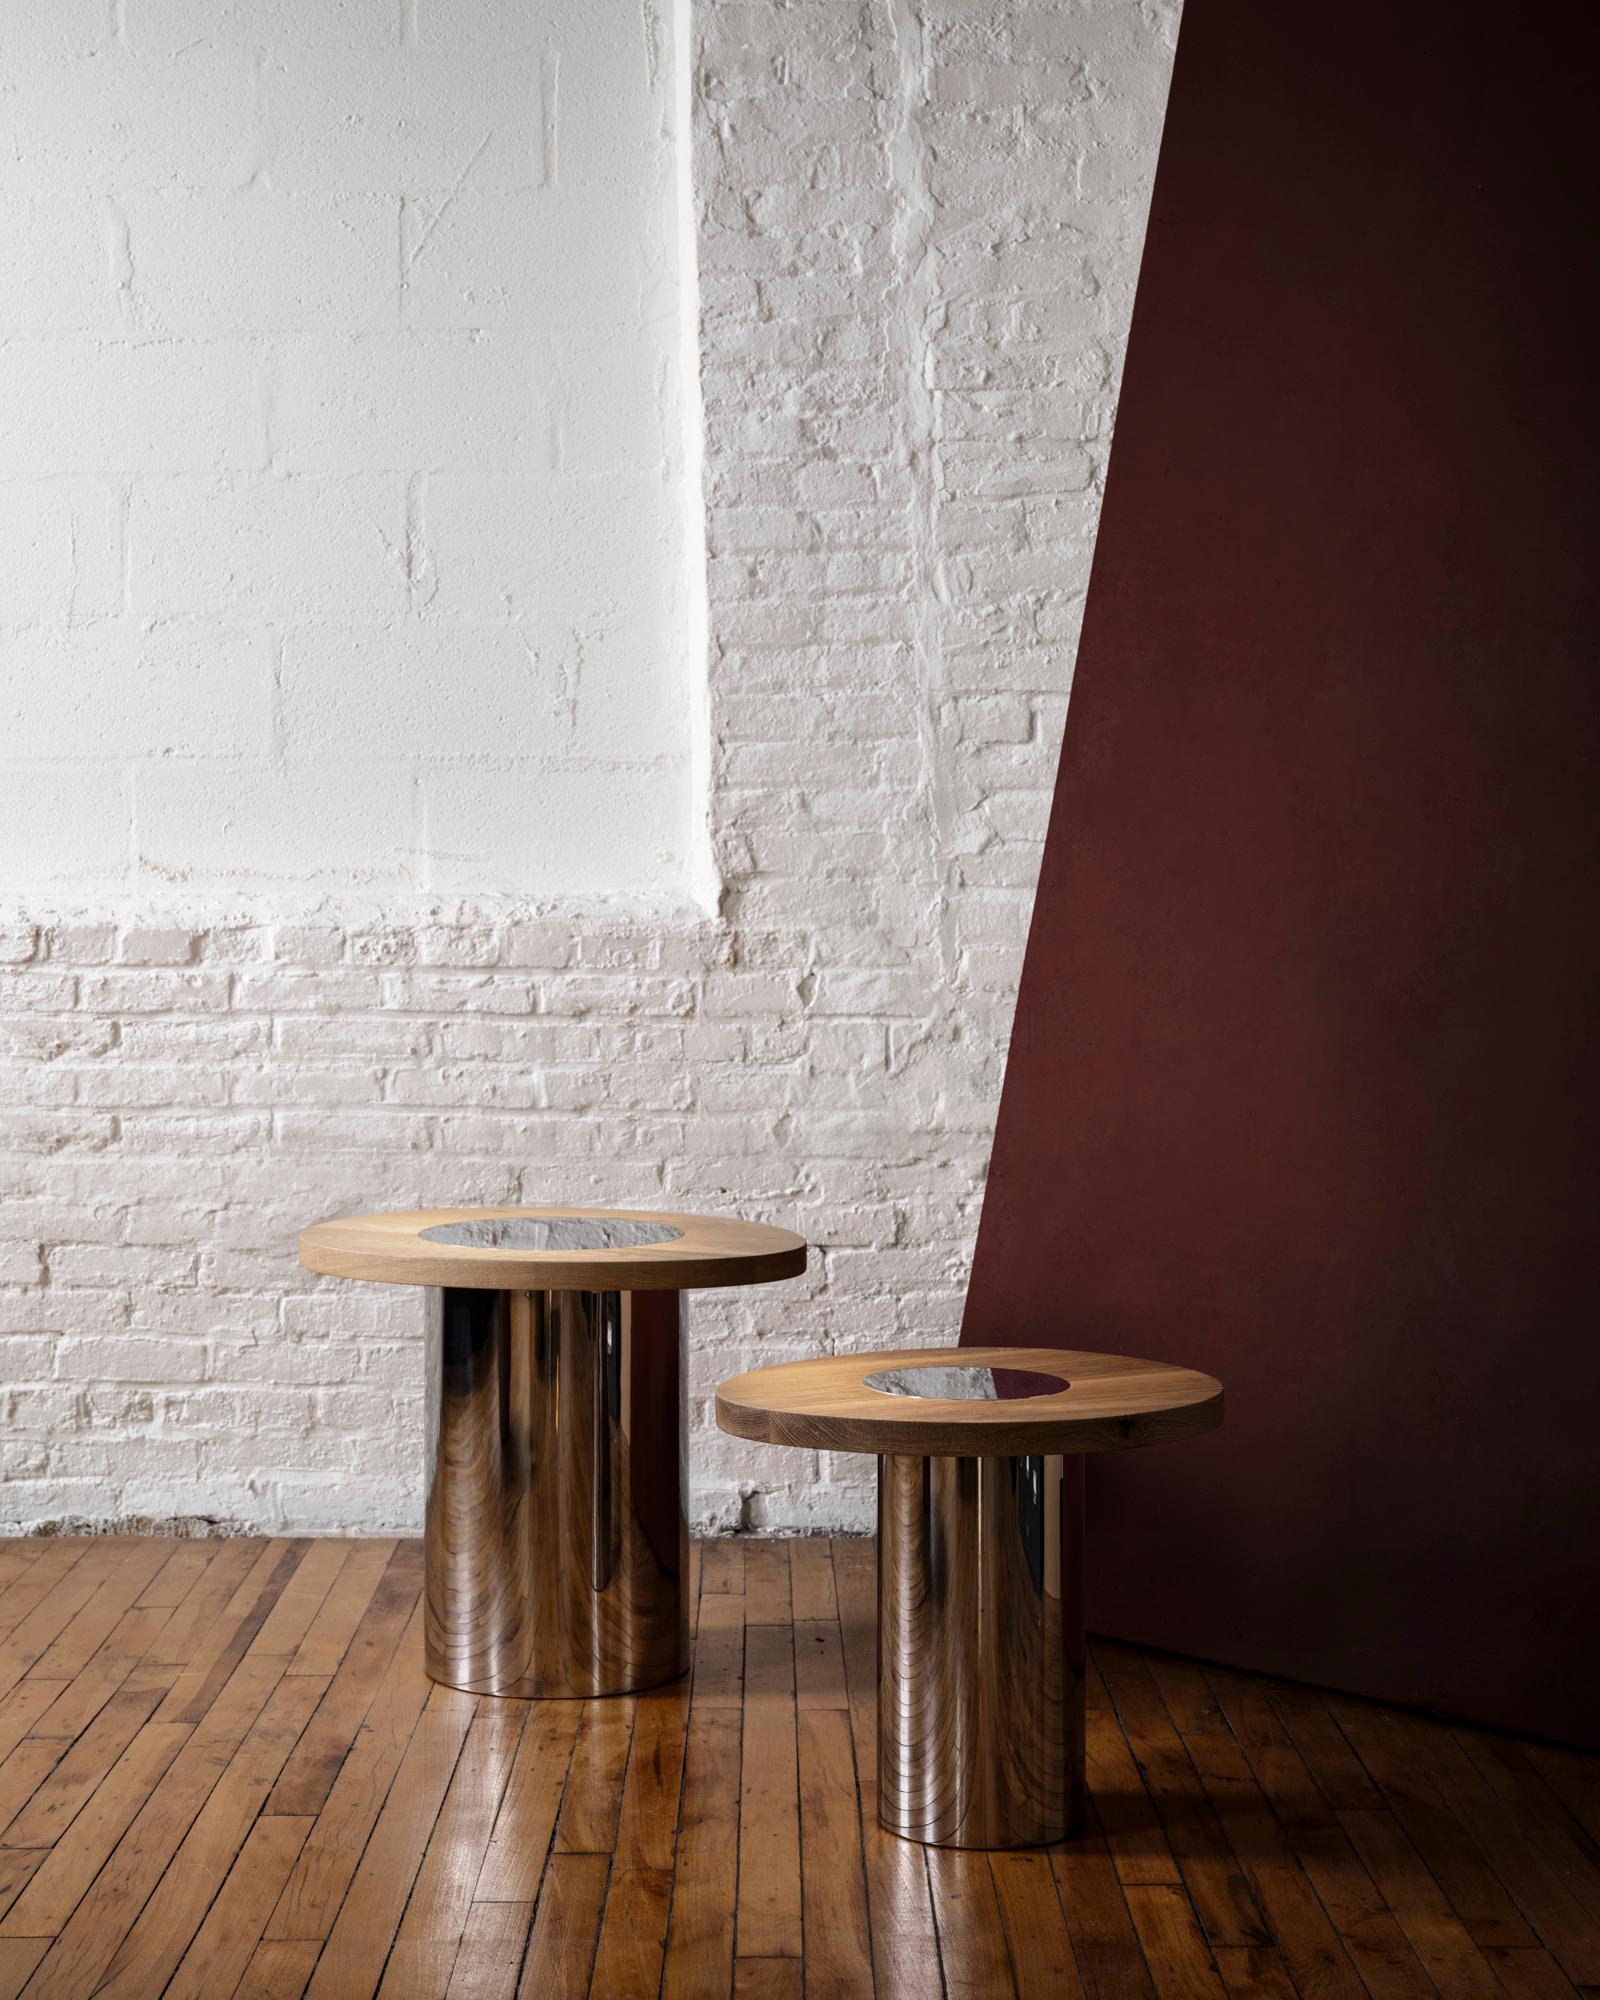 Inspired by the form and function of grain silos, the sculptural Silo Side Tables feature solid wood and hand-finished brass or stainless steel wrapped legs. Available in three sizes and height options to allow for various nesting formations.

This